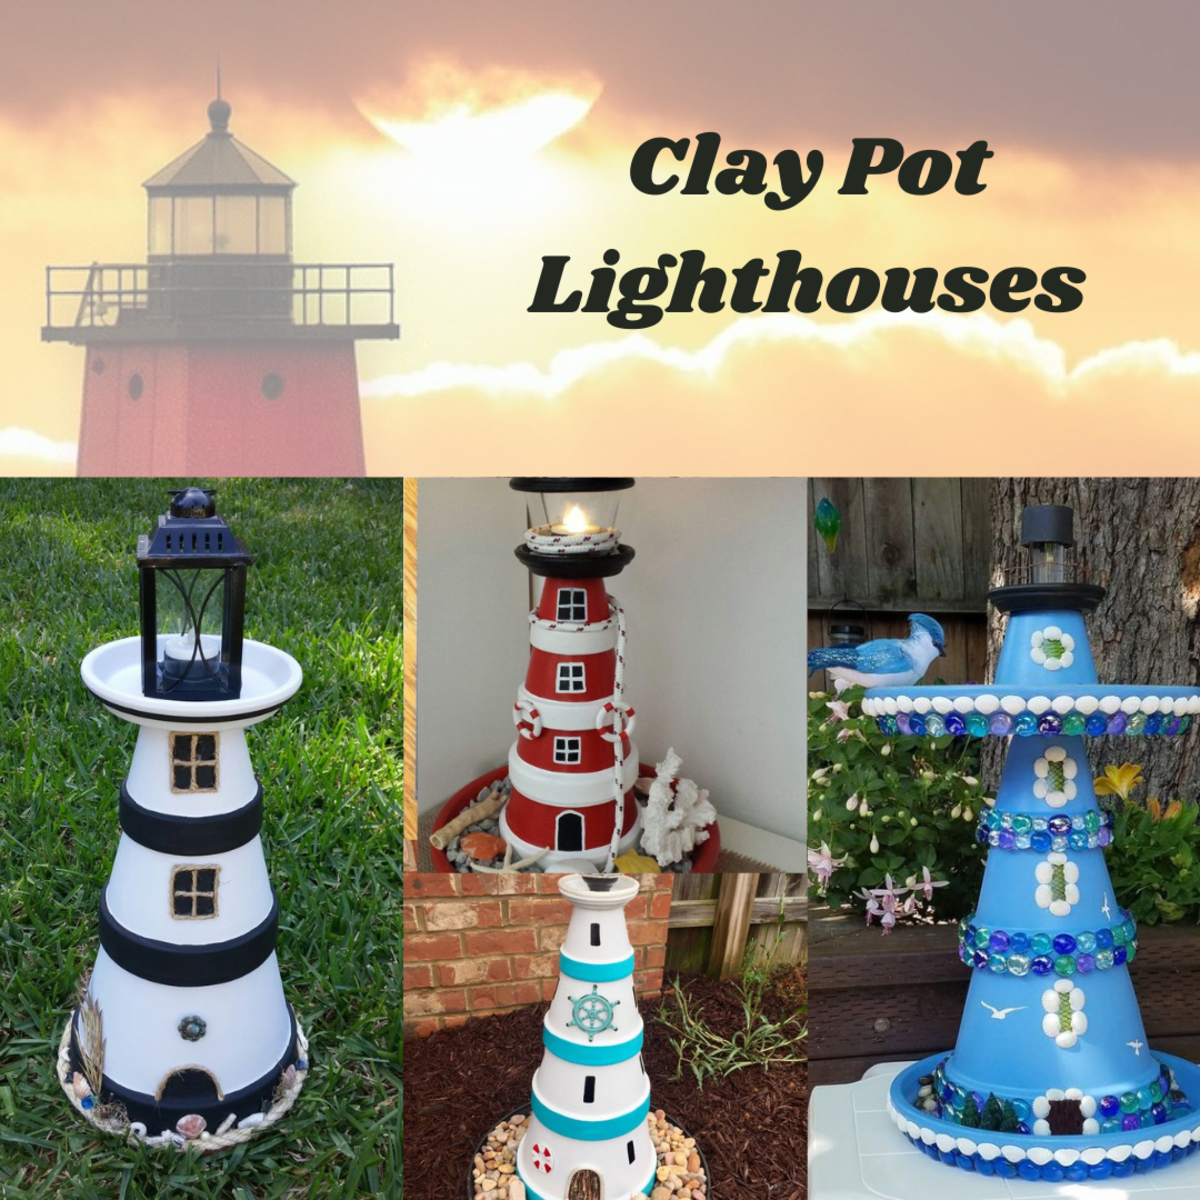 20+ DIY Clay Pot Lighthouses that are Truly Works of Art